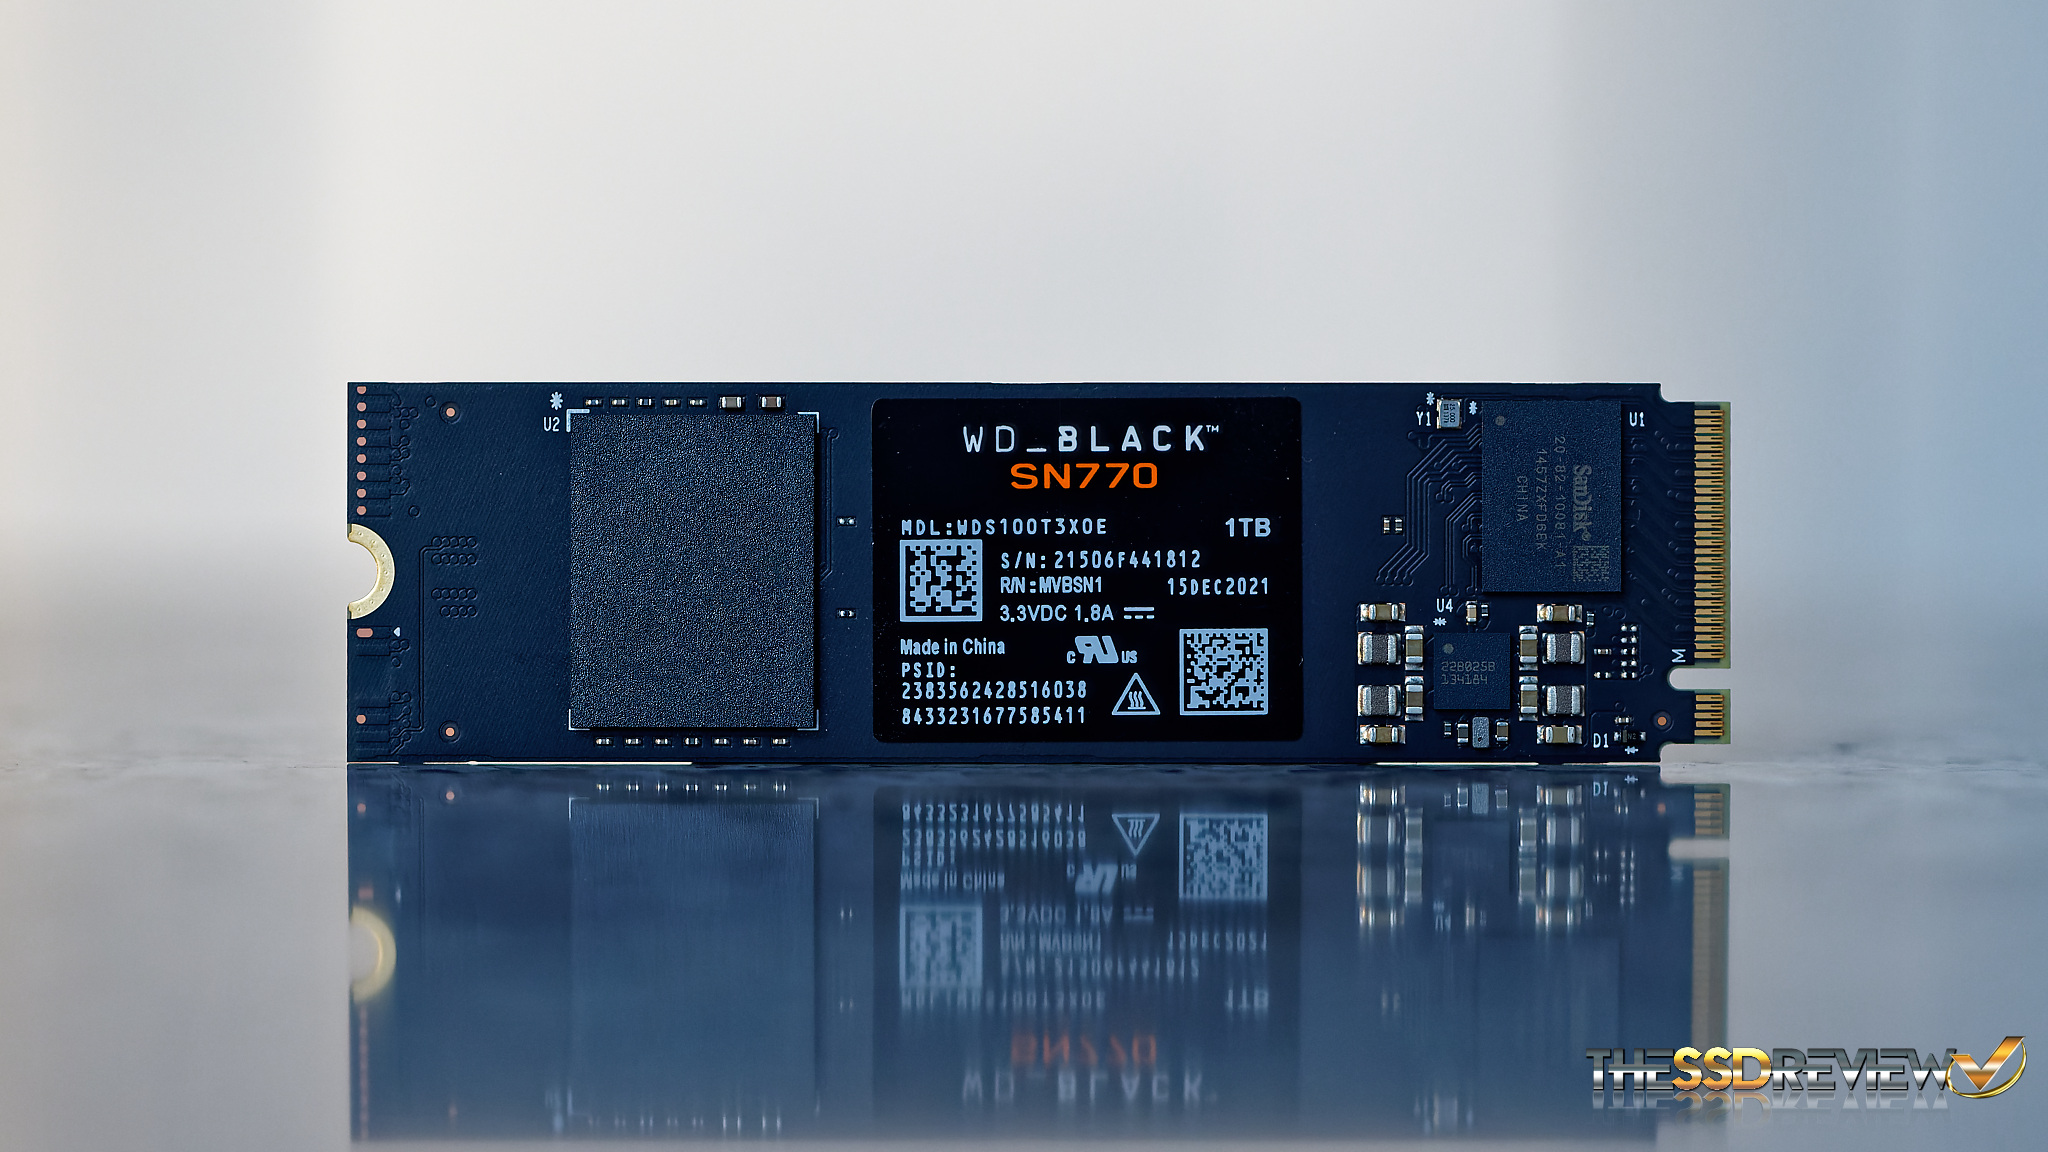 The WD Black SN770 1TB SSD is better than half price on